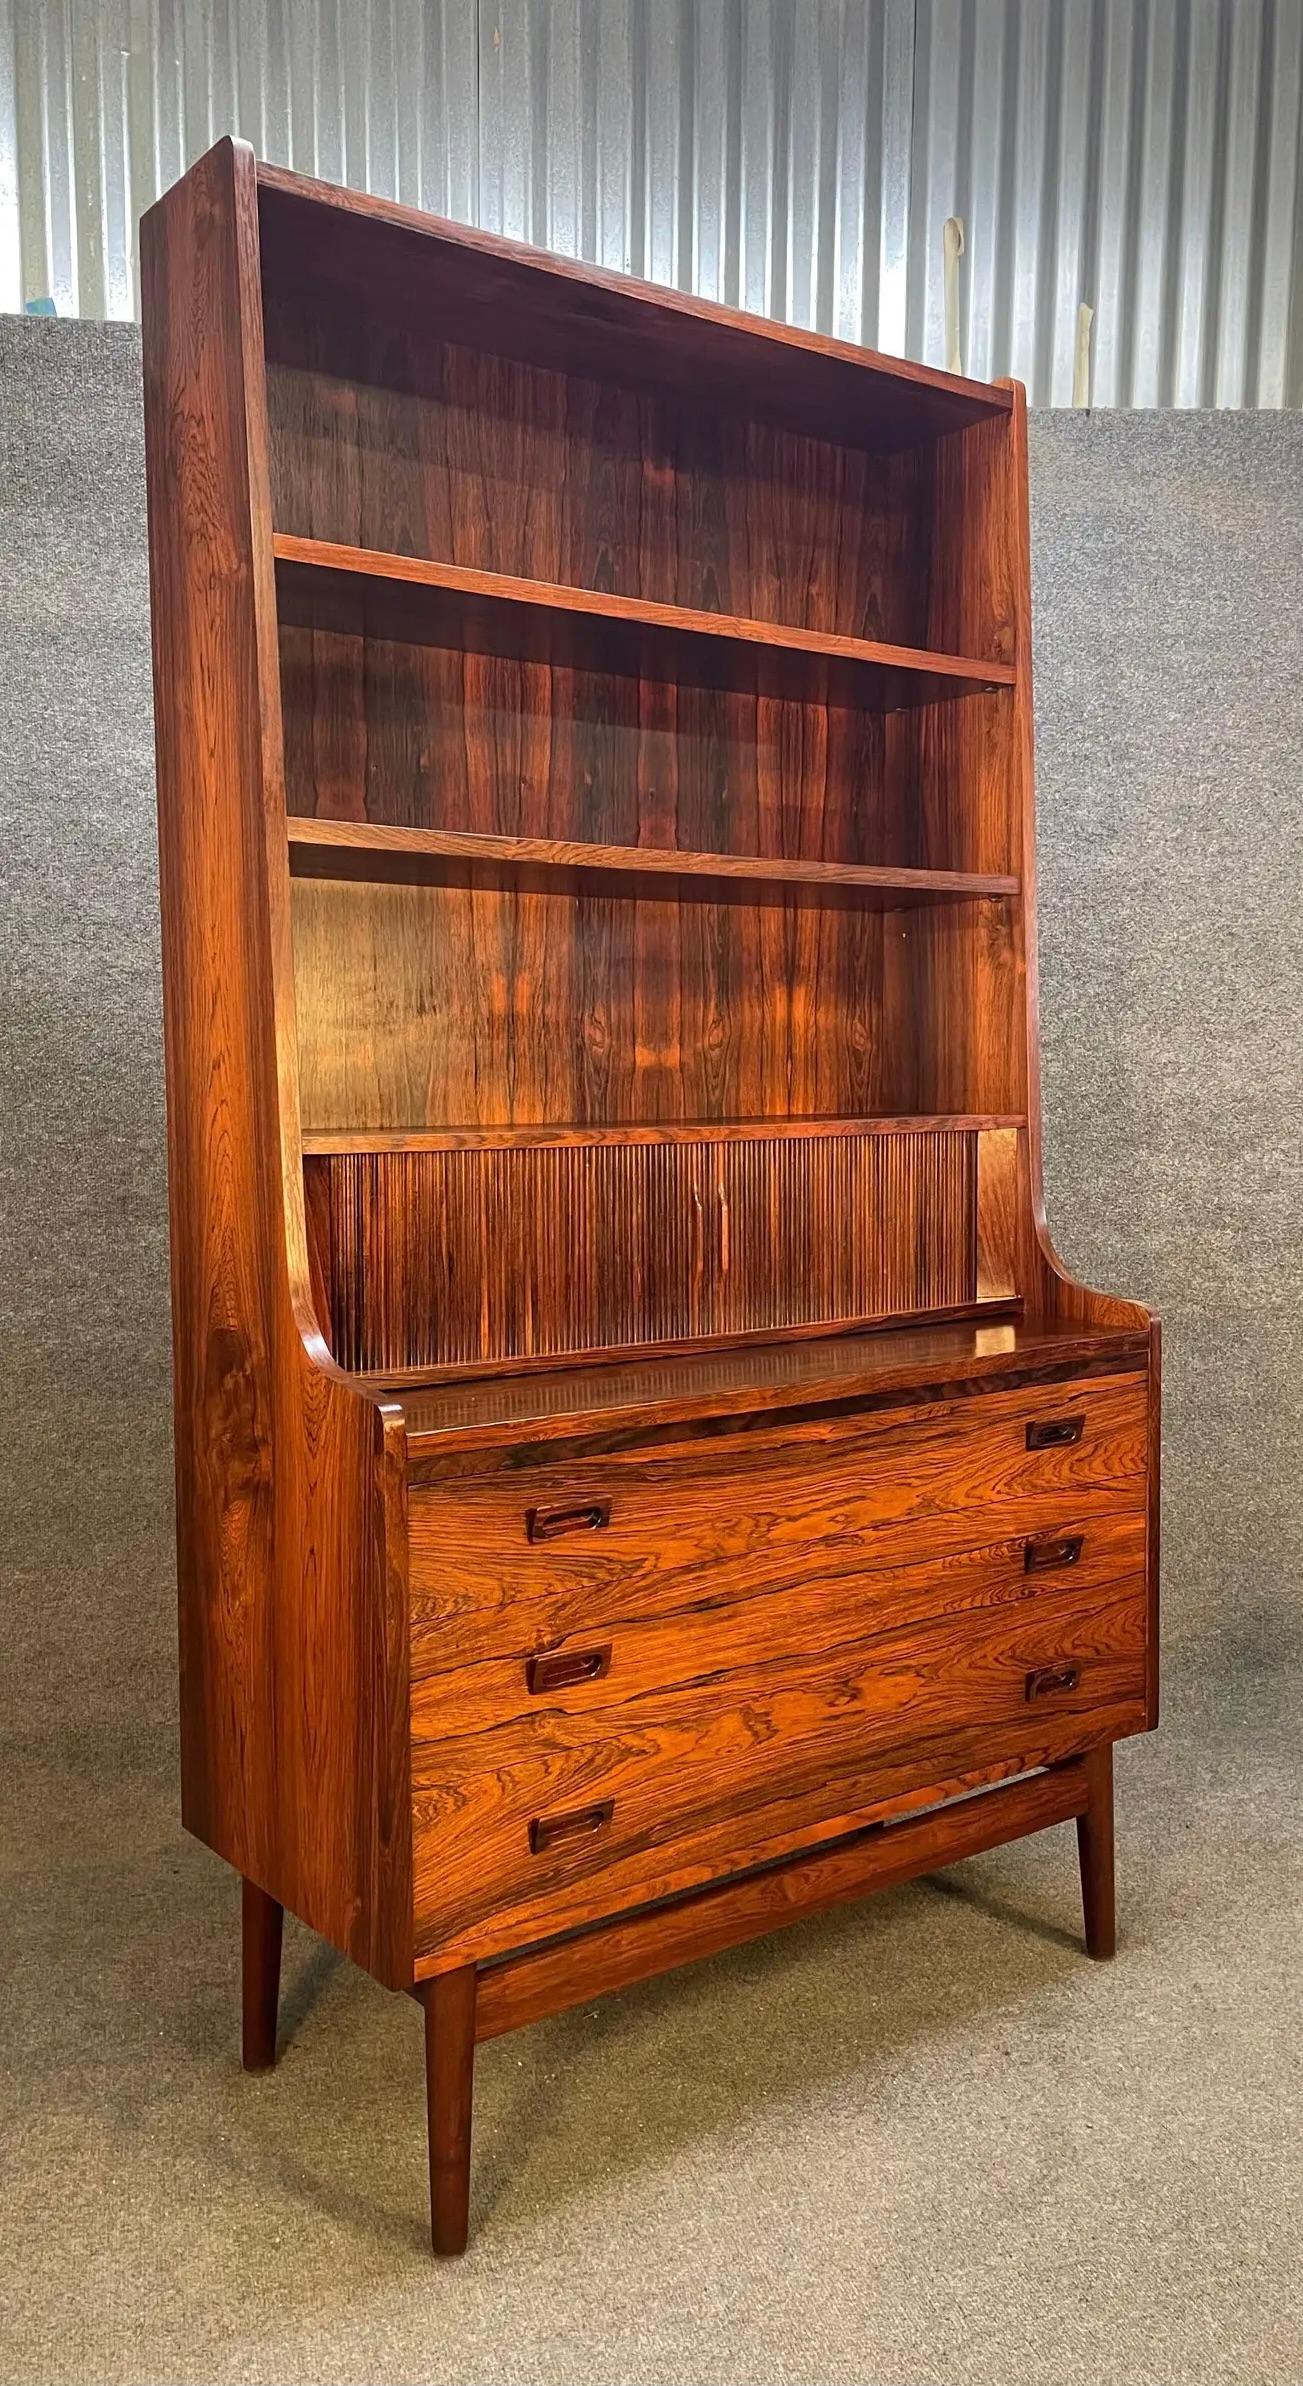 Here is a very sought after Scandinavian modern secretary desk designed by Johannes Sorth for Nexxo Mobelfabrik in Denmark in the 1960's. This exquisite piece, in Brazilian rosewood, features in the center two tambour doors with three small drawers